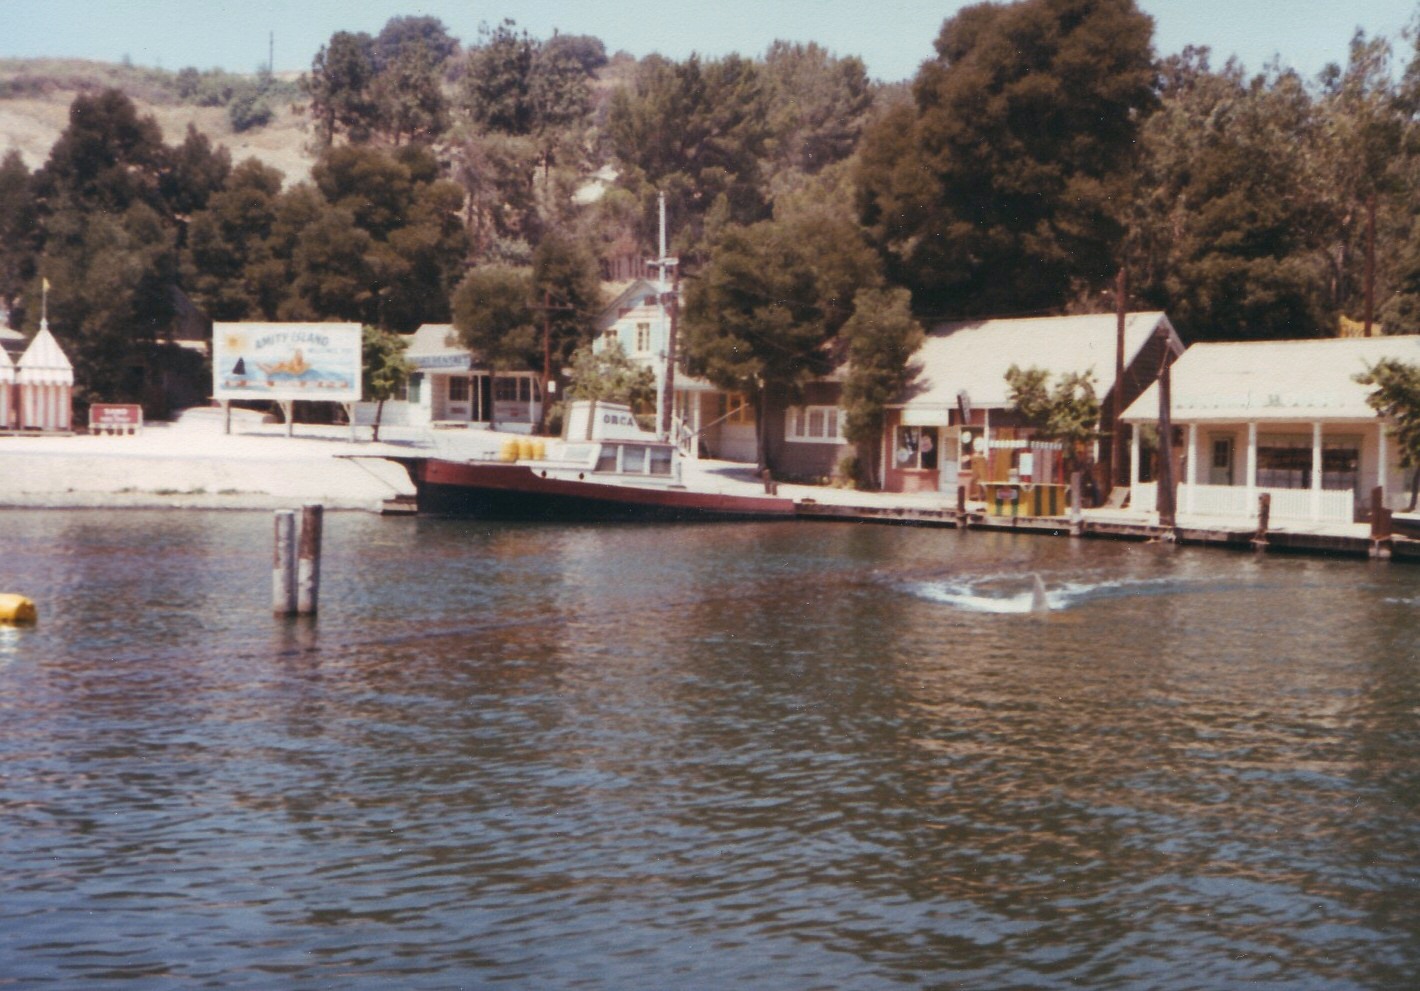 The area has been seen in Murder She Wrote (as 'Cabot Cove') and has 